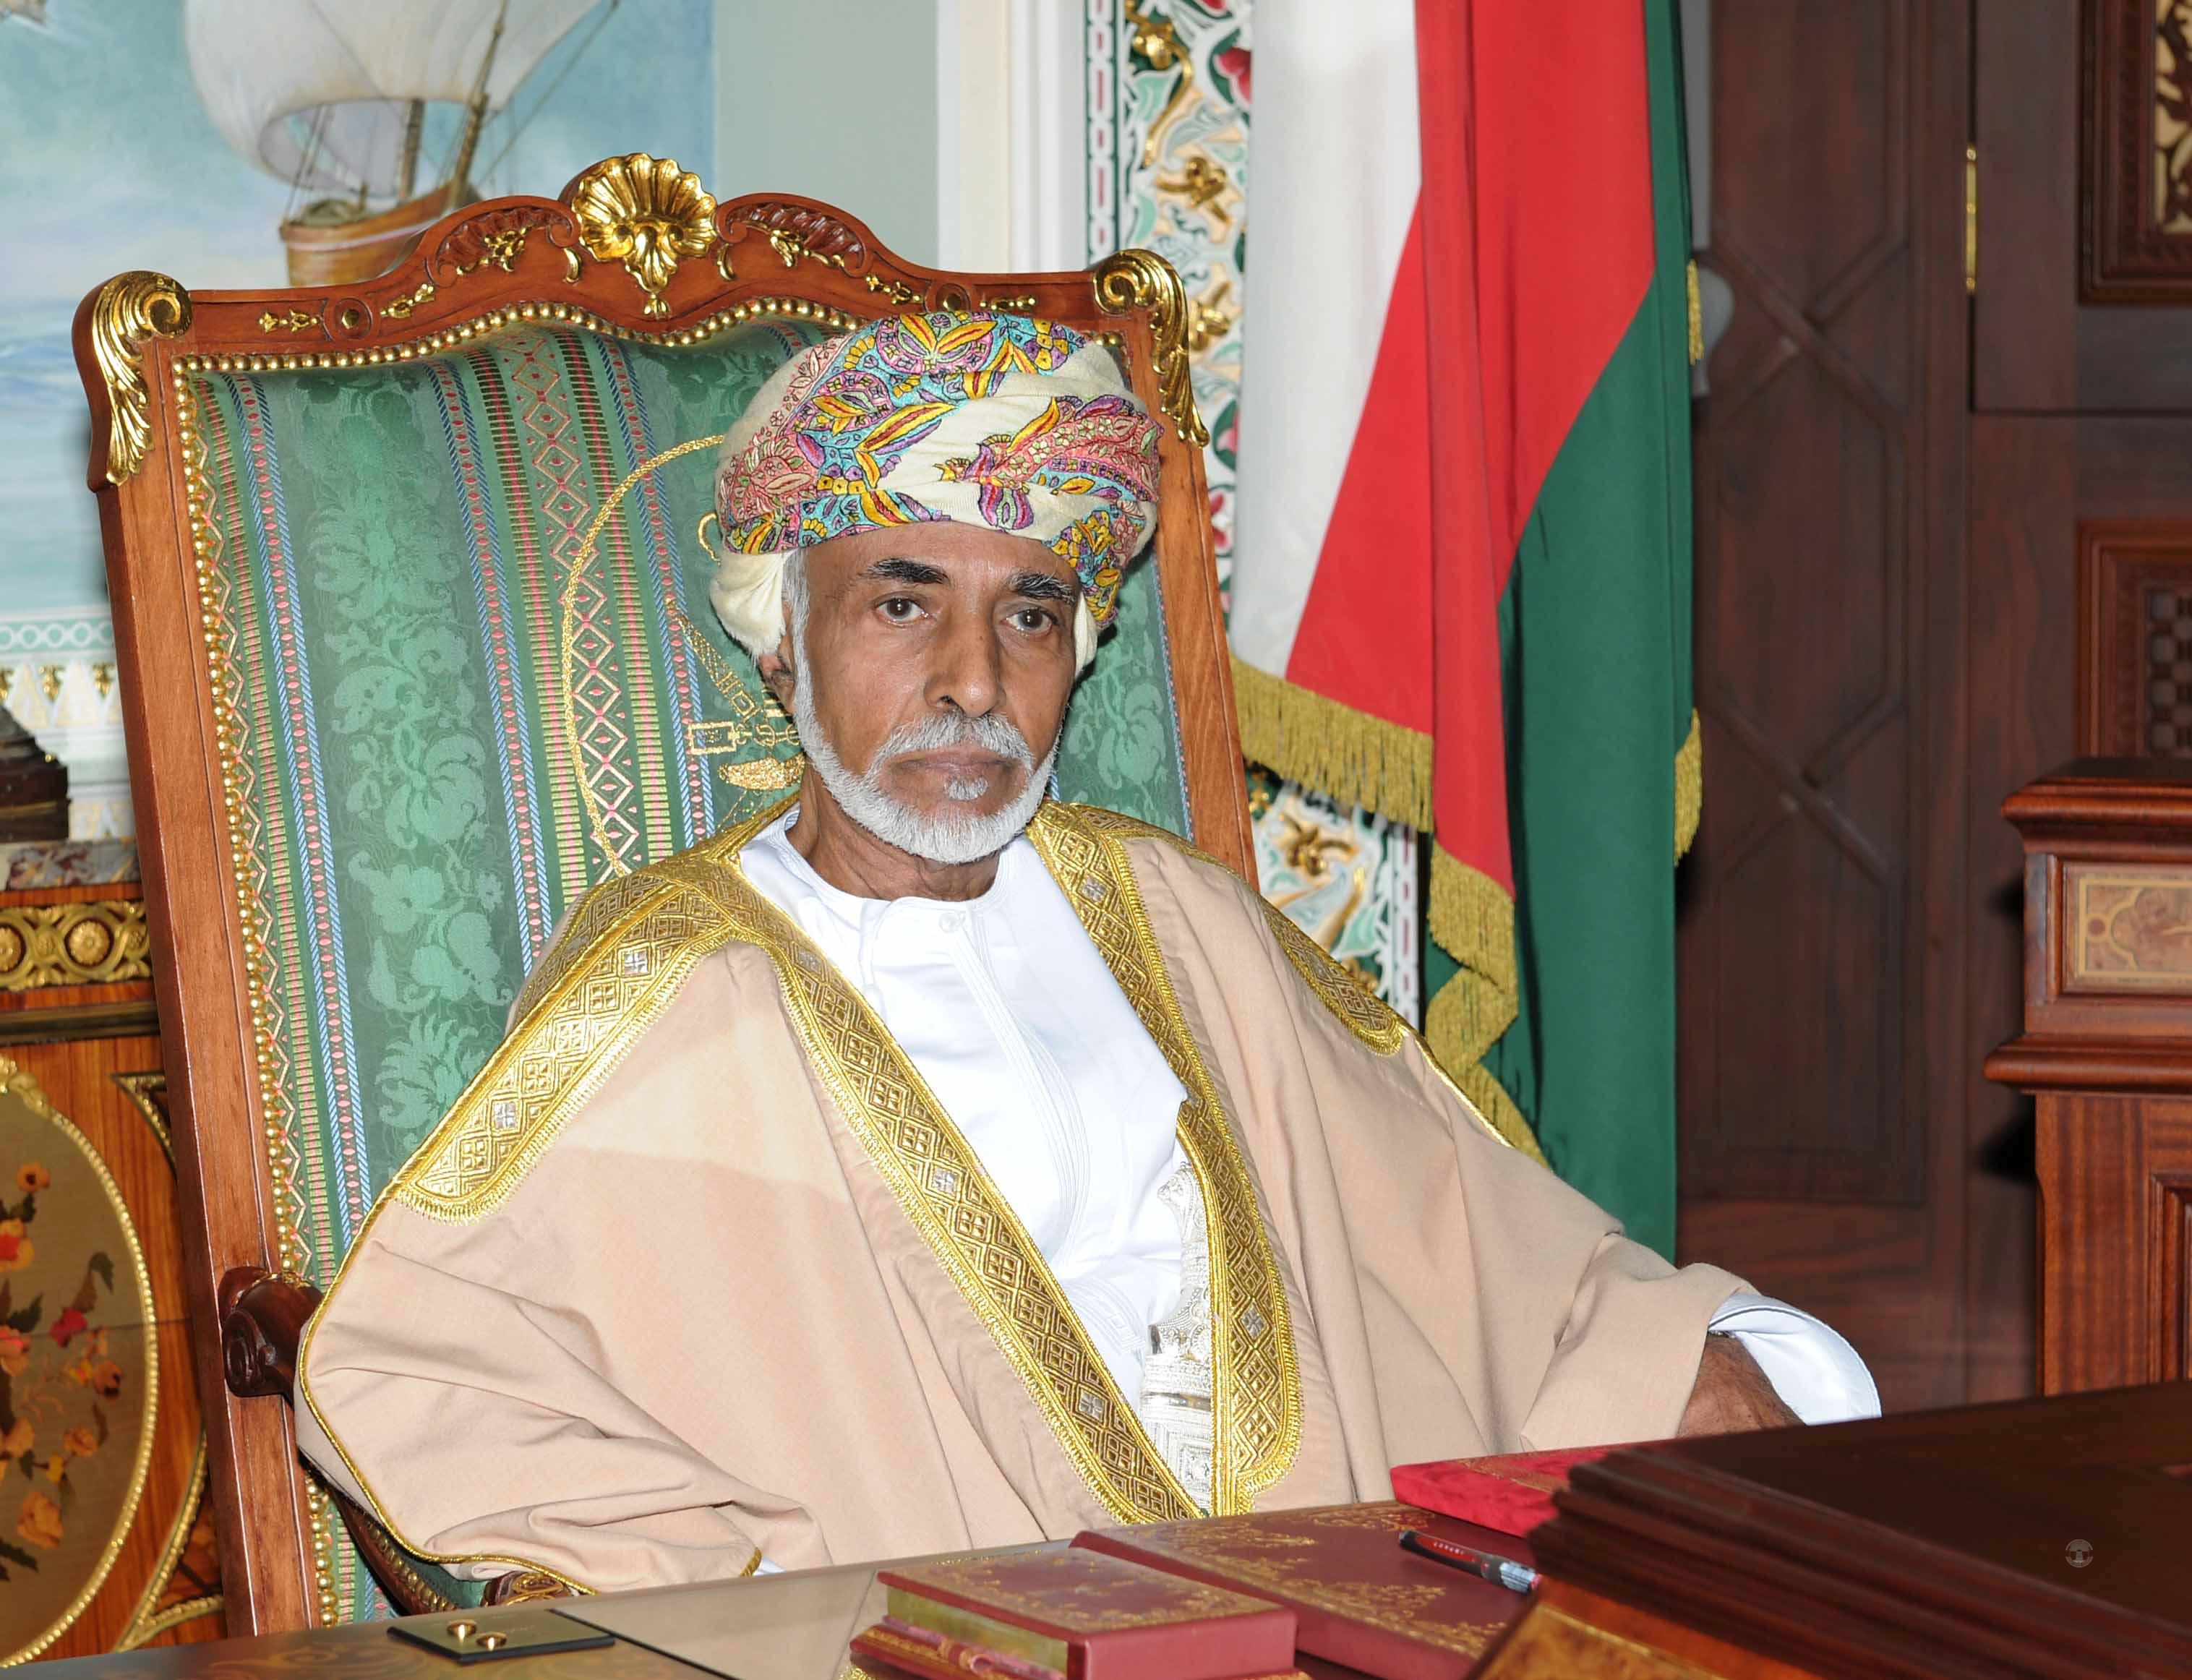 His Majesty Sultan Qaboos sends greetings to Brunei Darussalam and Guyana